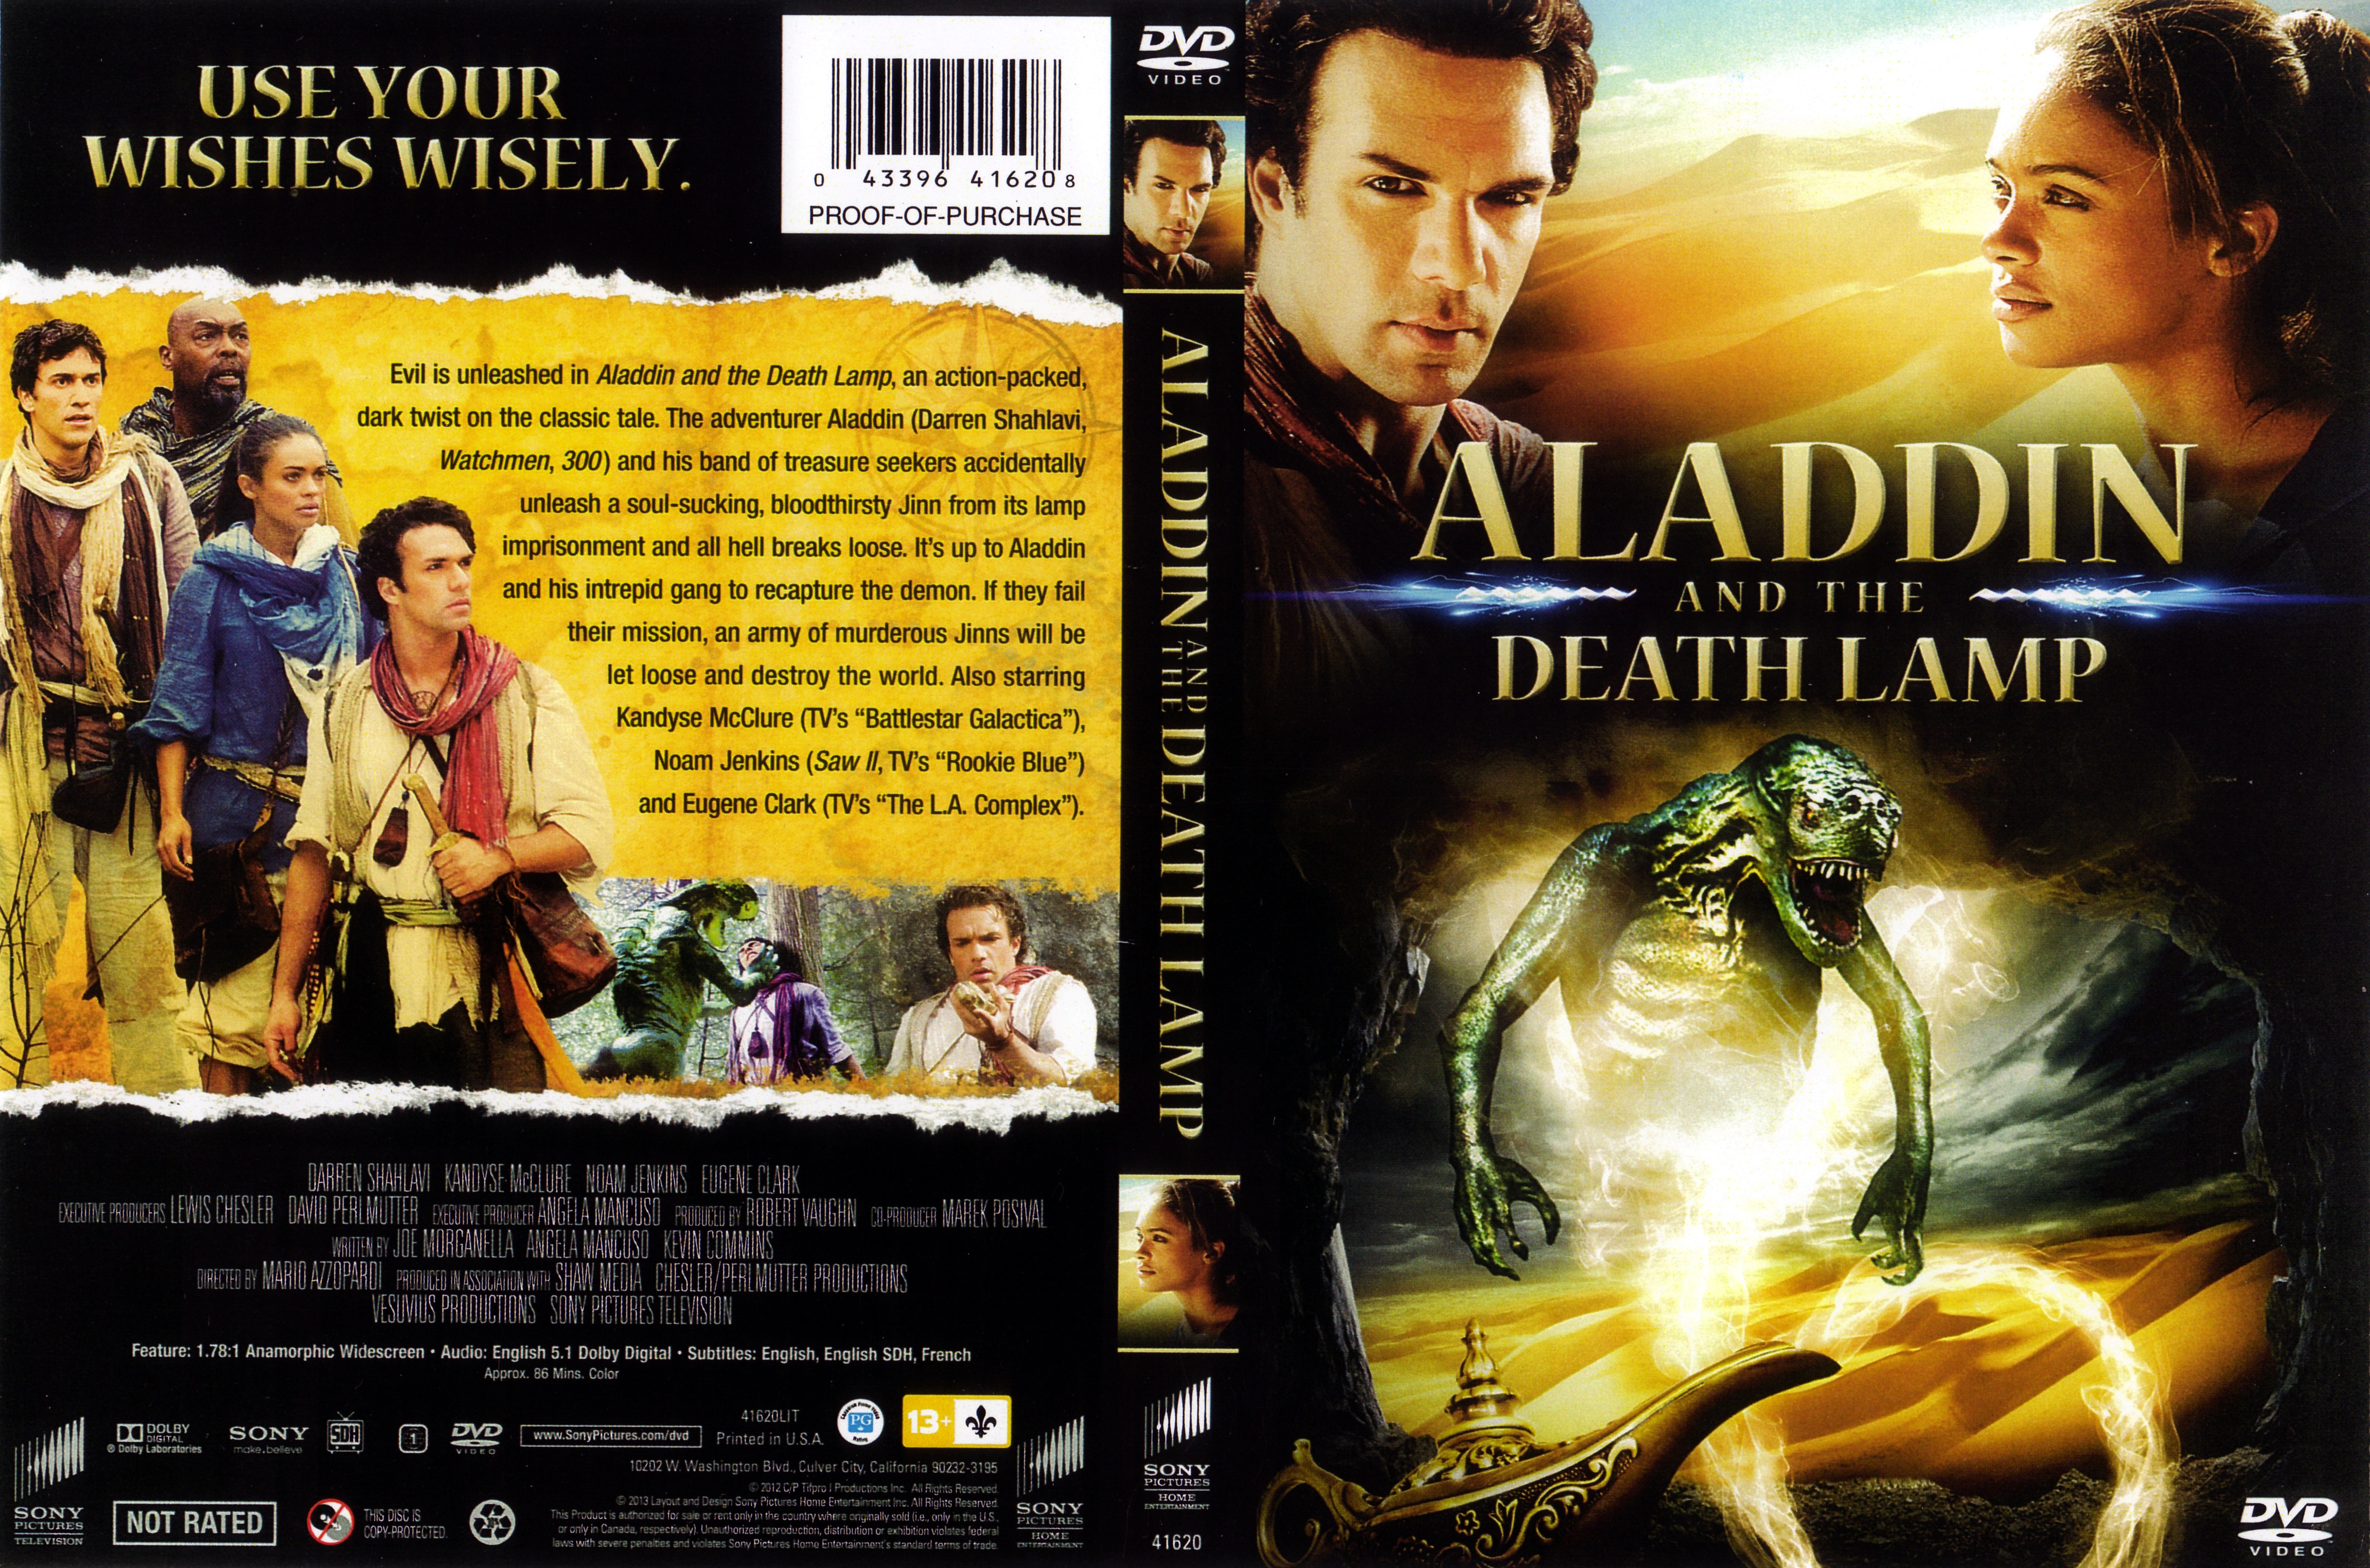 Jaquette DVD Aladdin and the death lamp Zone 1